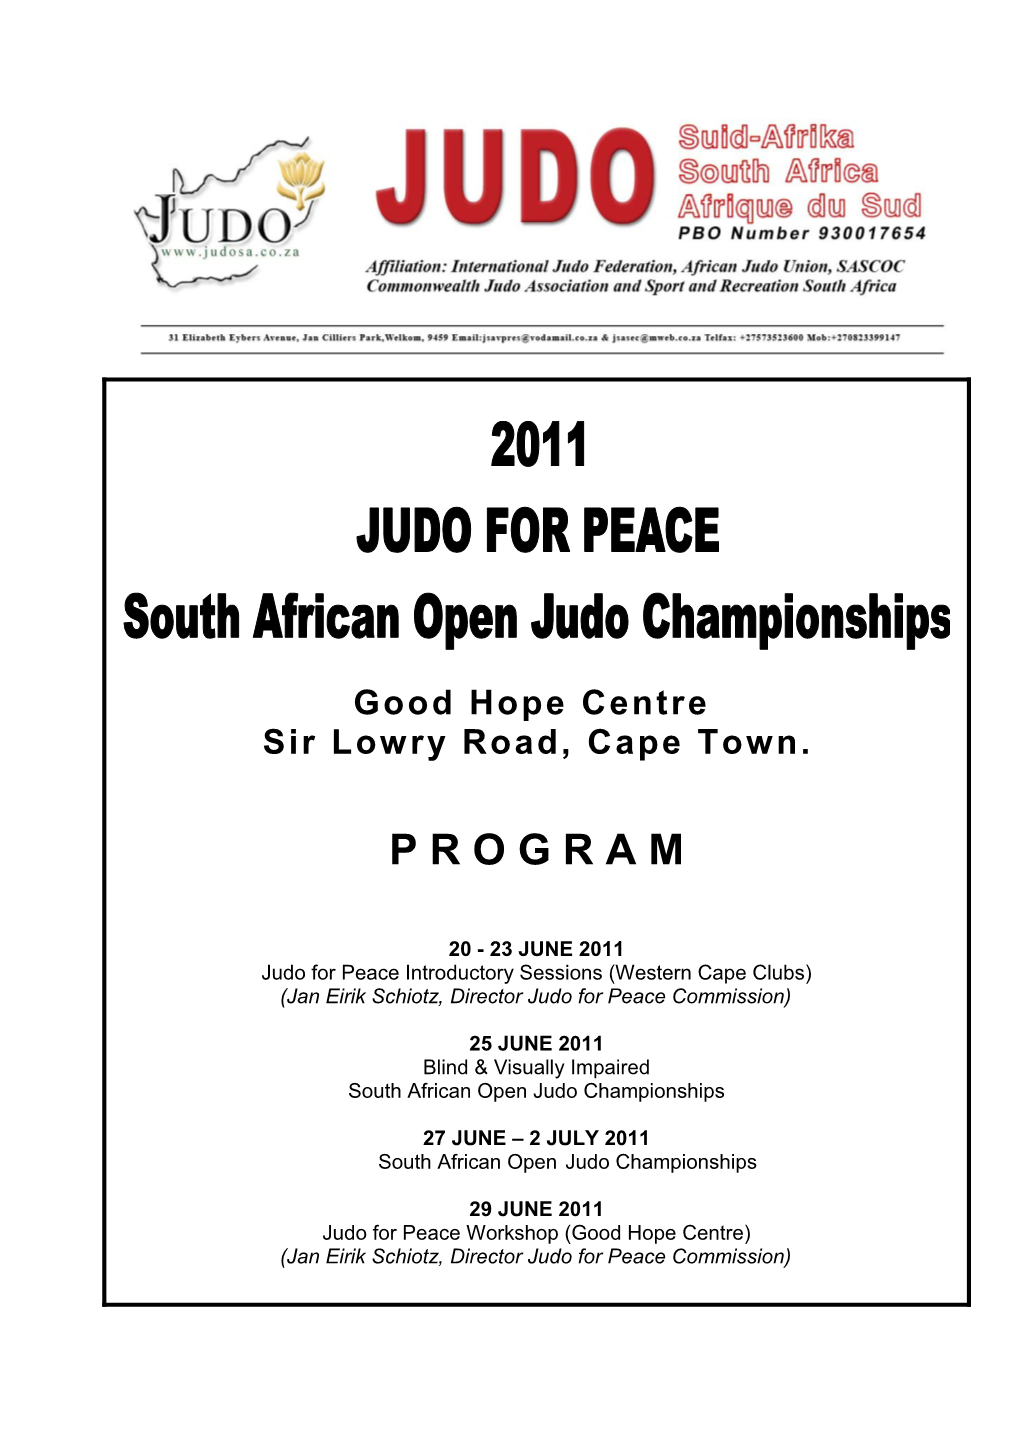 South African Open Judochampionships